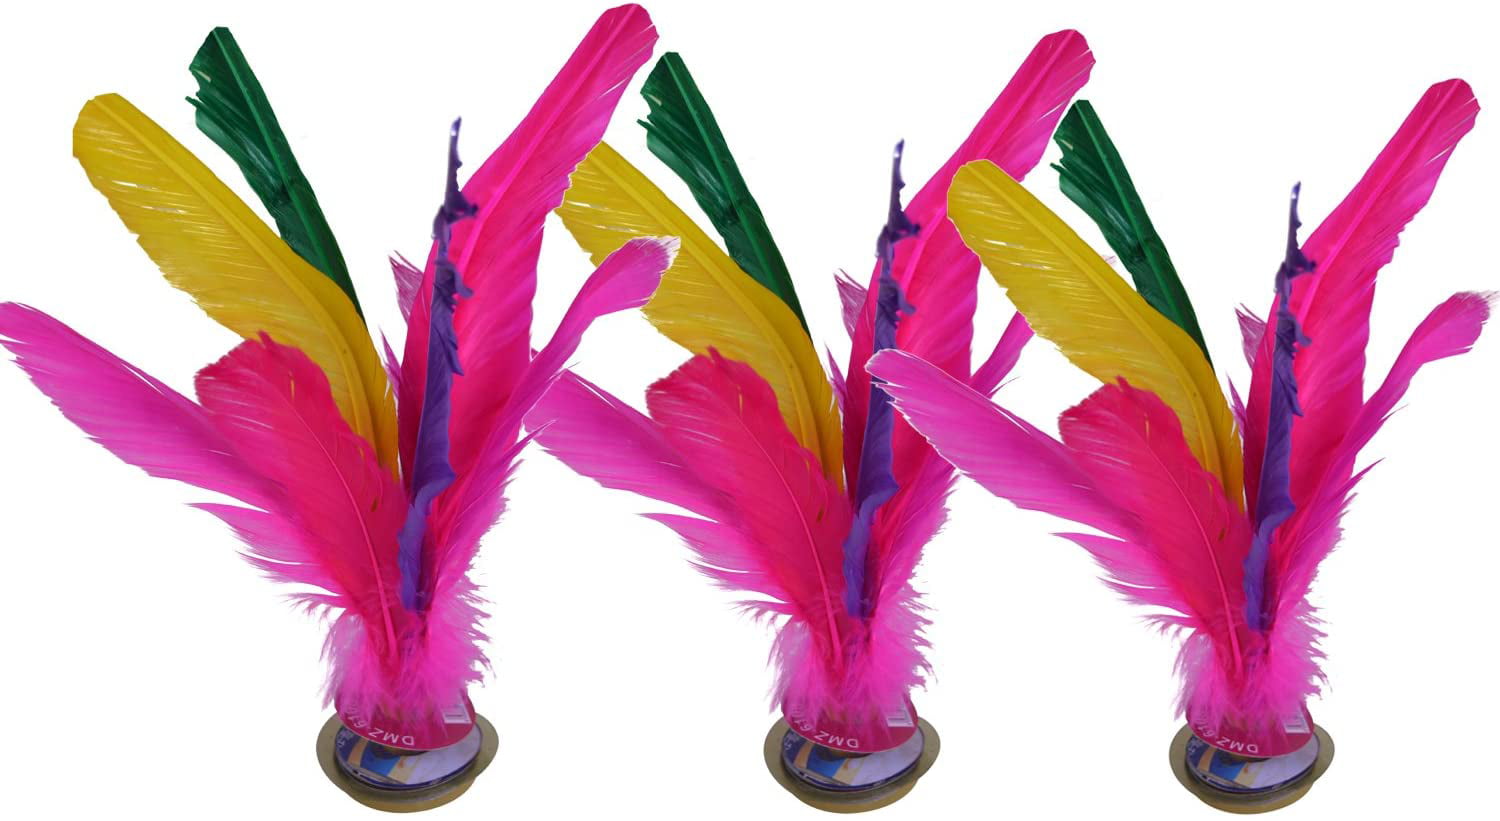 AUEAR 6 Pack Colorful Kicker Shuttlecock Chinese Jianzi Professional Foot Feather Foot Sports Indoor Outdoor Toy Game for Kids Adults 